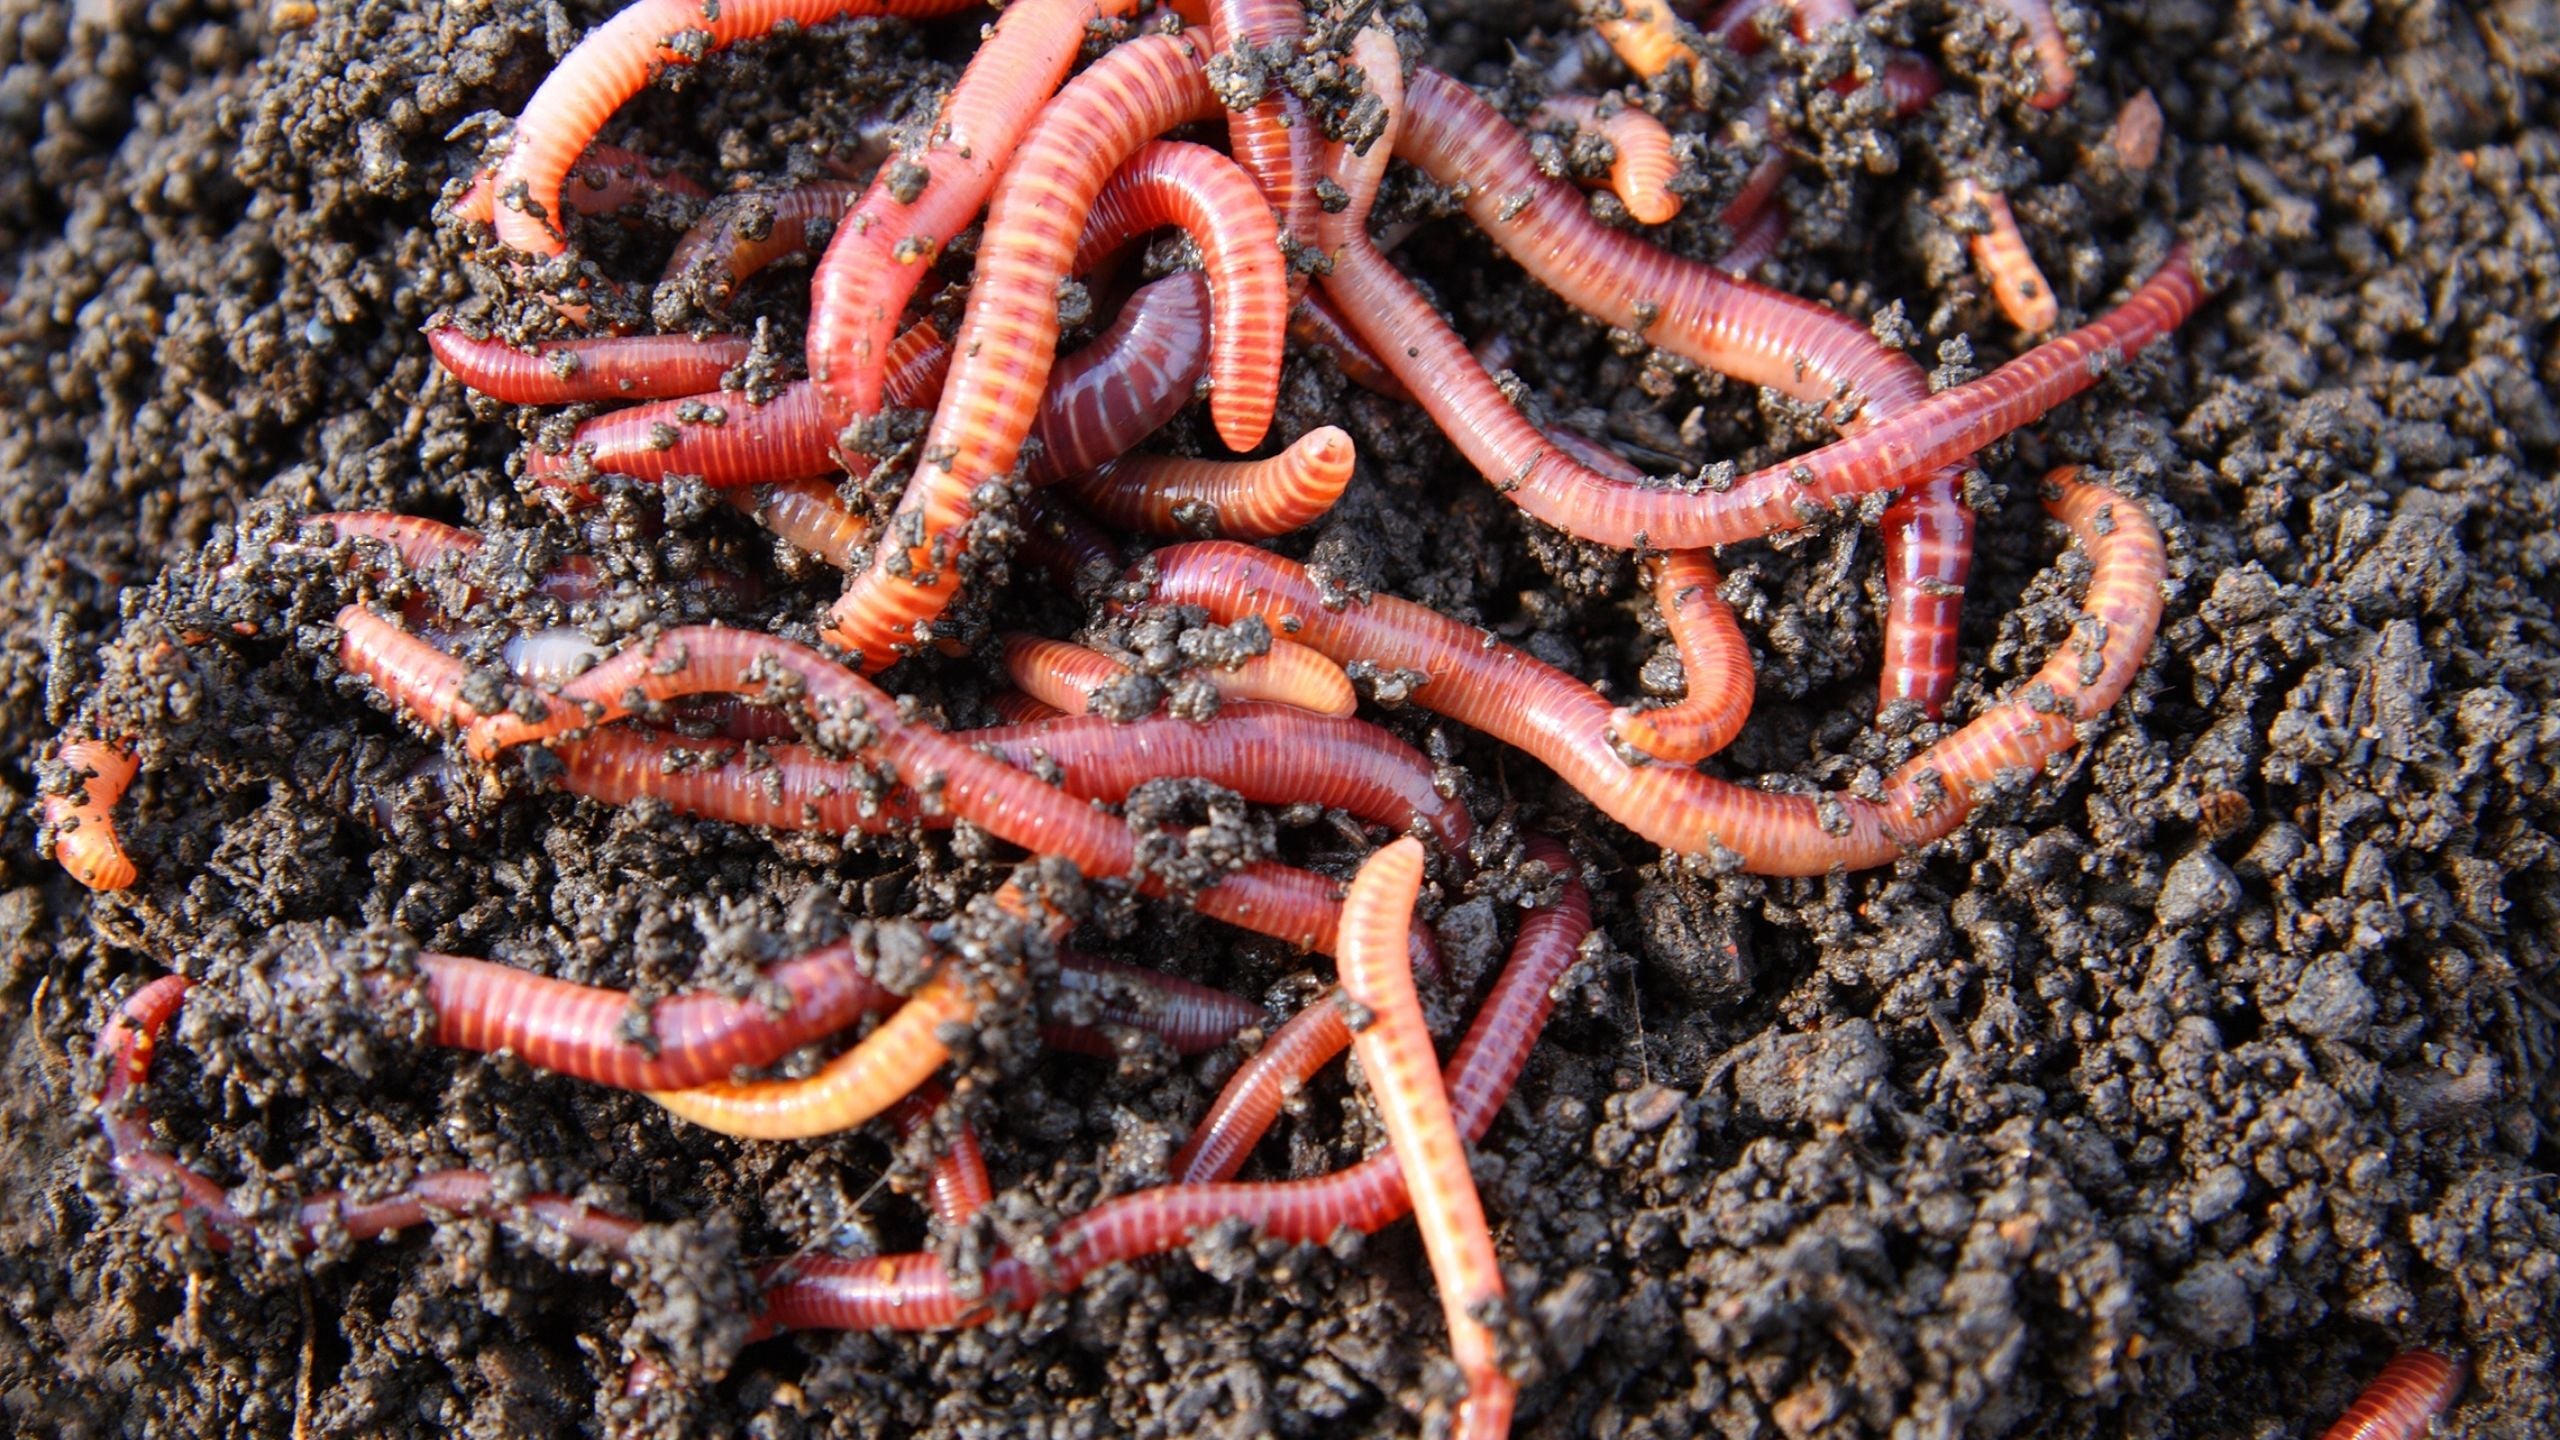 The Difference Between an Earthworm & Compost Worm Meme's Worms